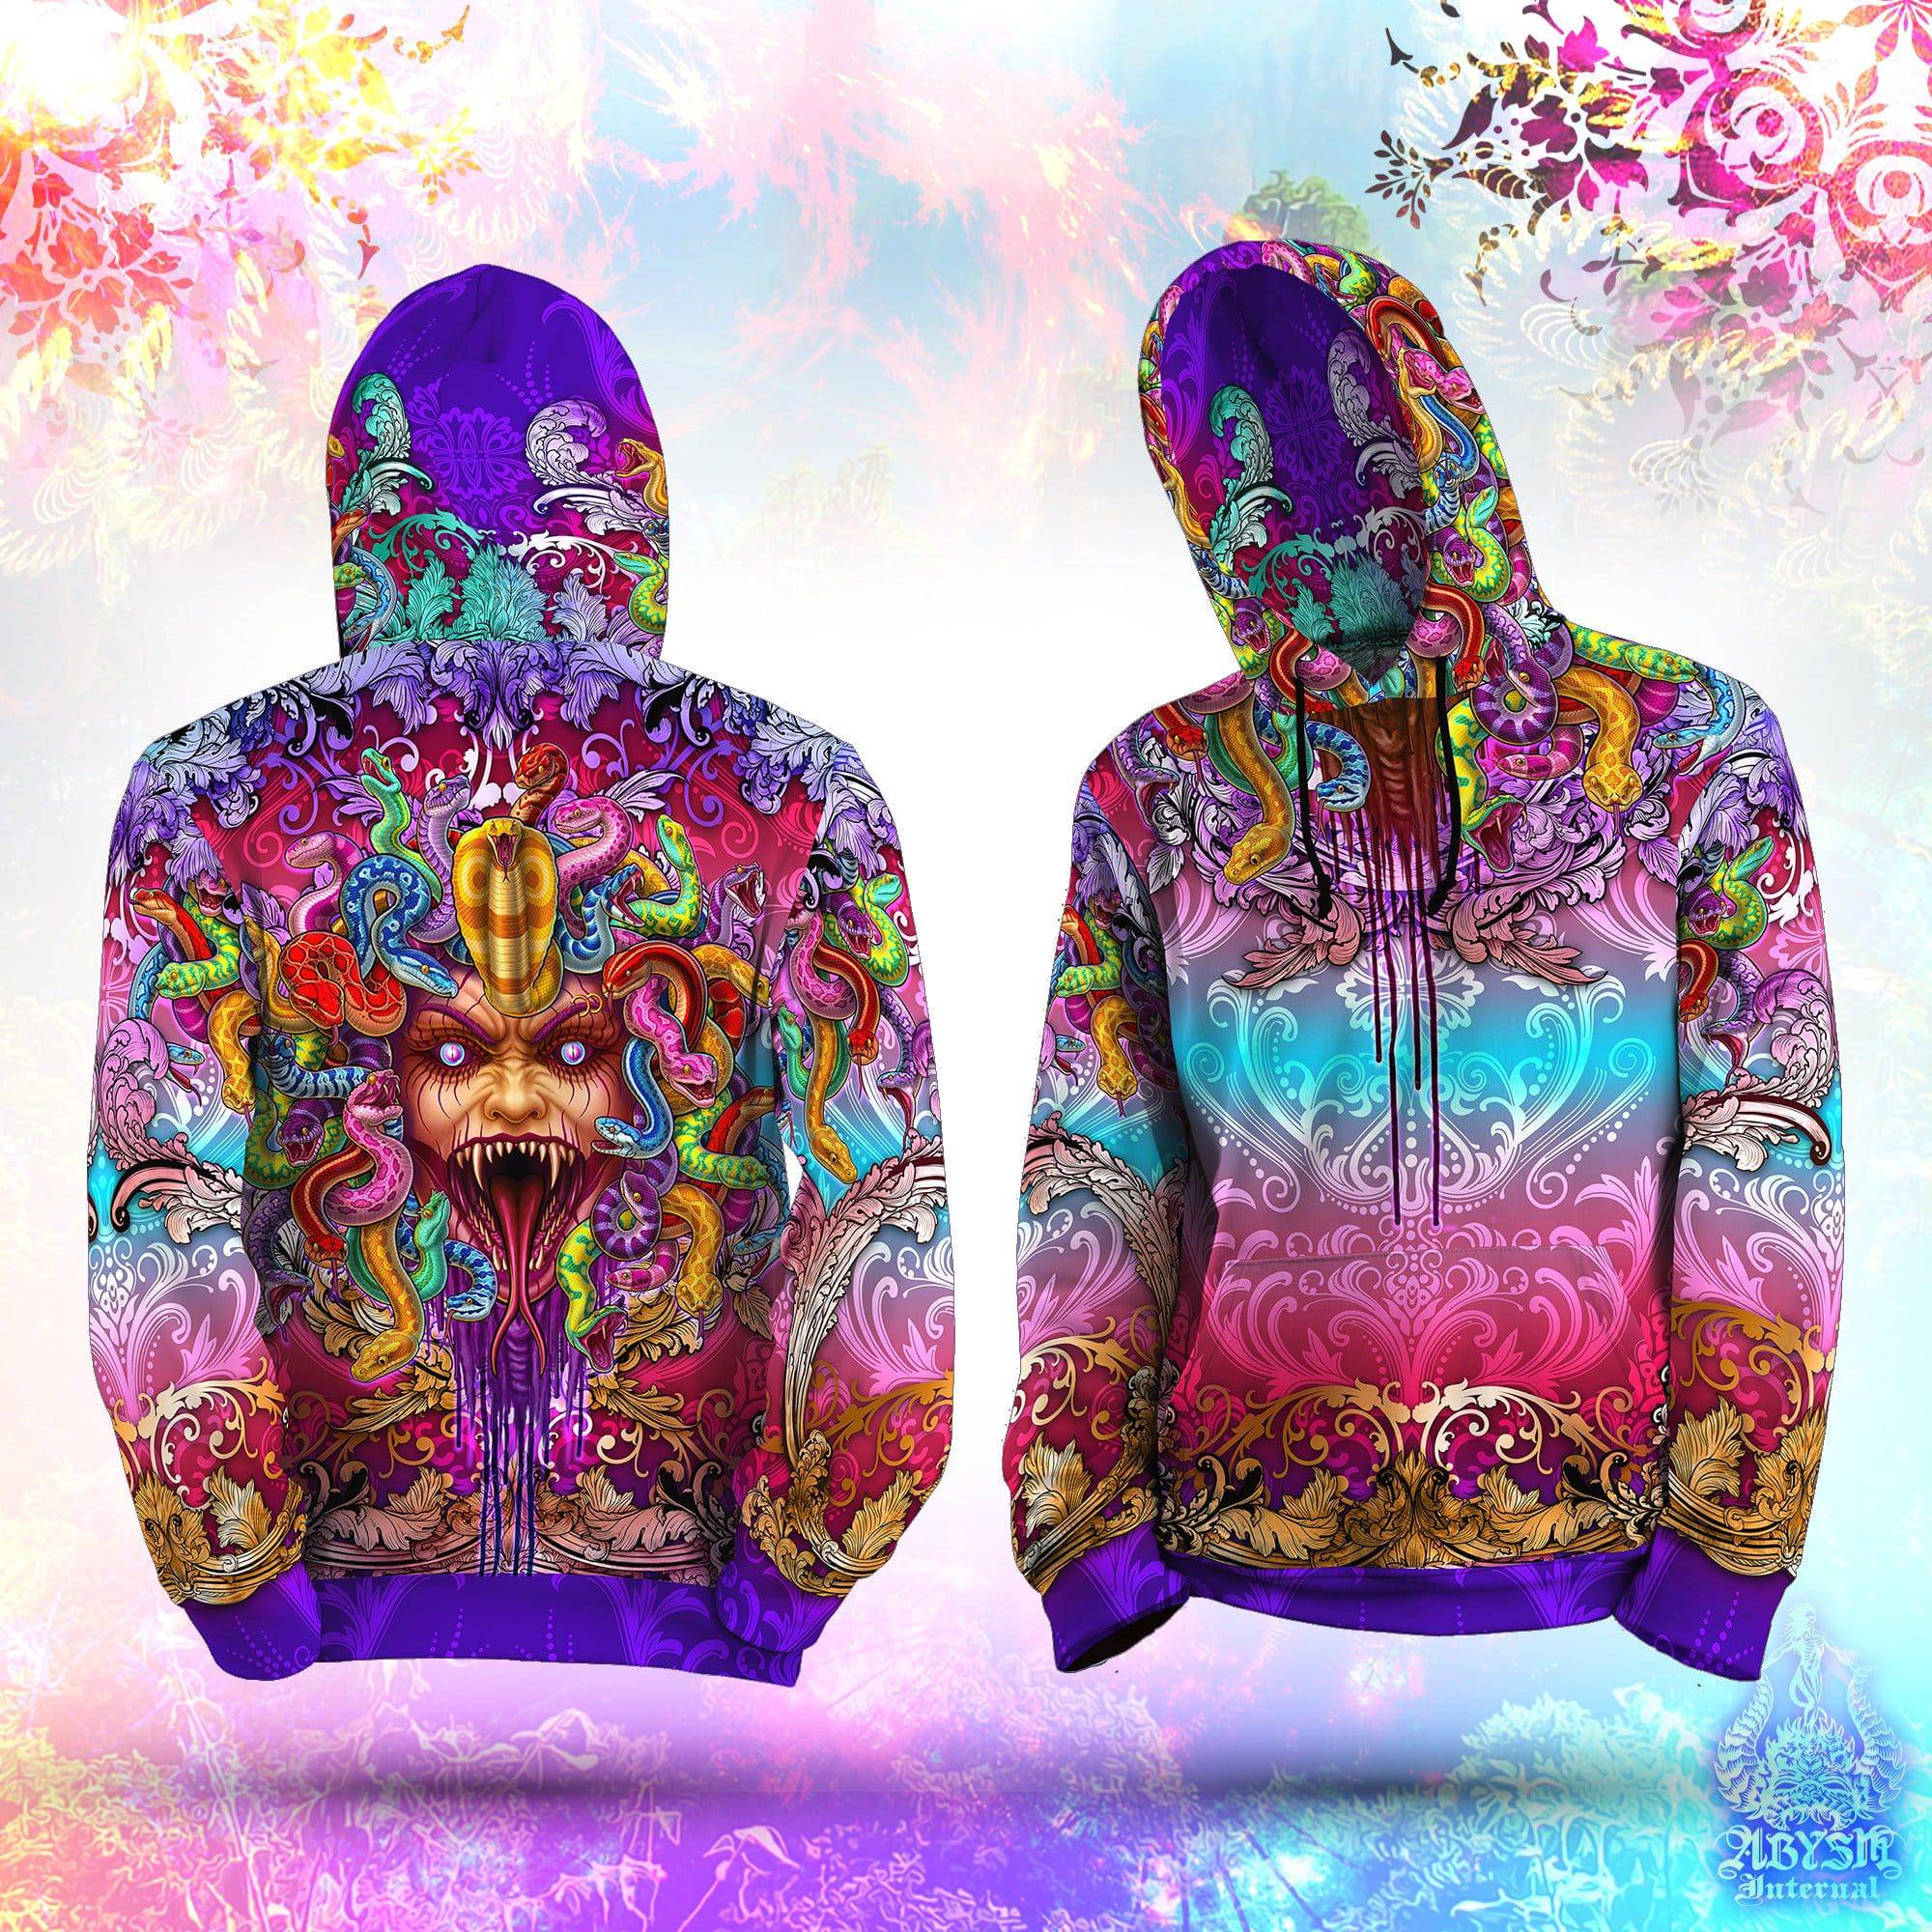 Trippy Hoodie, Rave Outfit, Psychedelic Streetwear, Psy Festival Sweater, Alternative Clothing, Unisex - Enraged Medusa - Abysm Internal